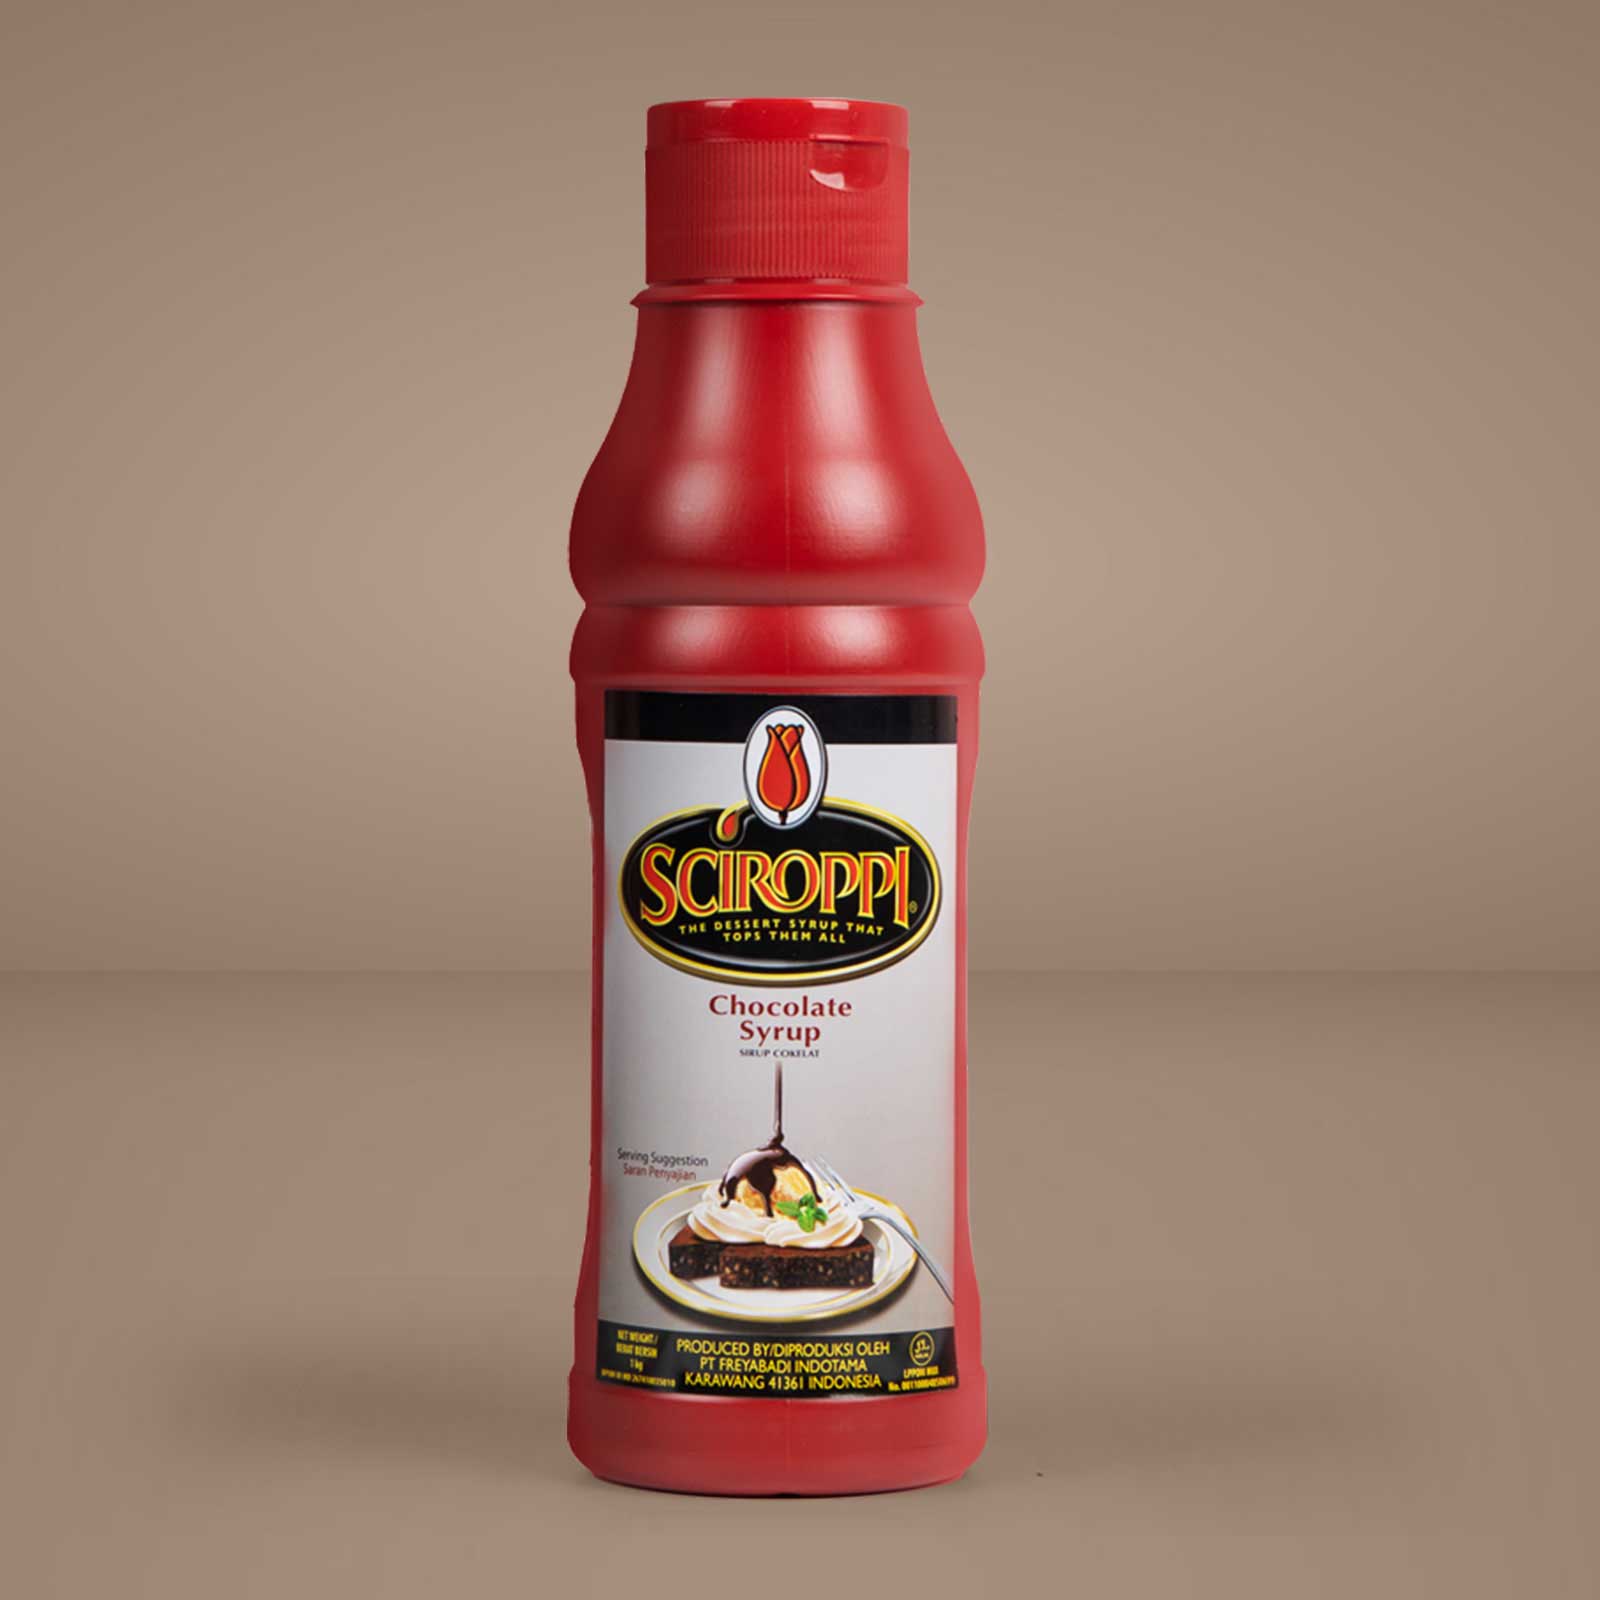 sciroppi-Chocolate-syrup-front-1-1